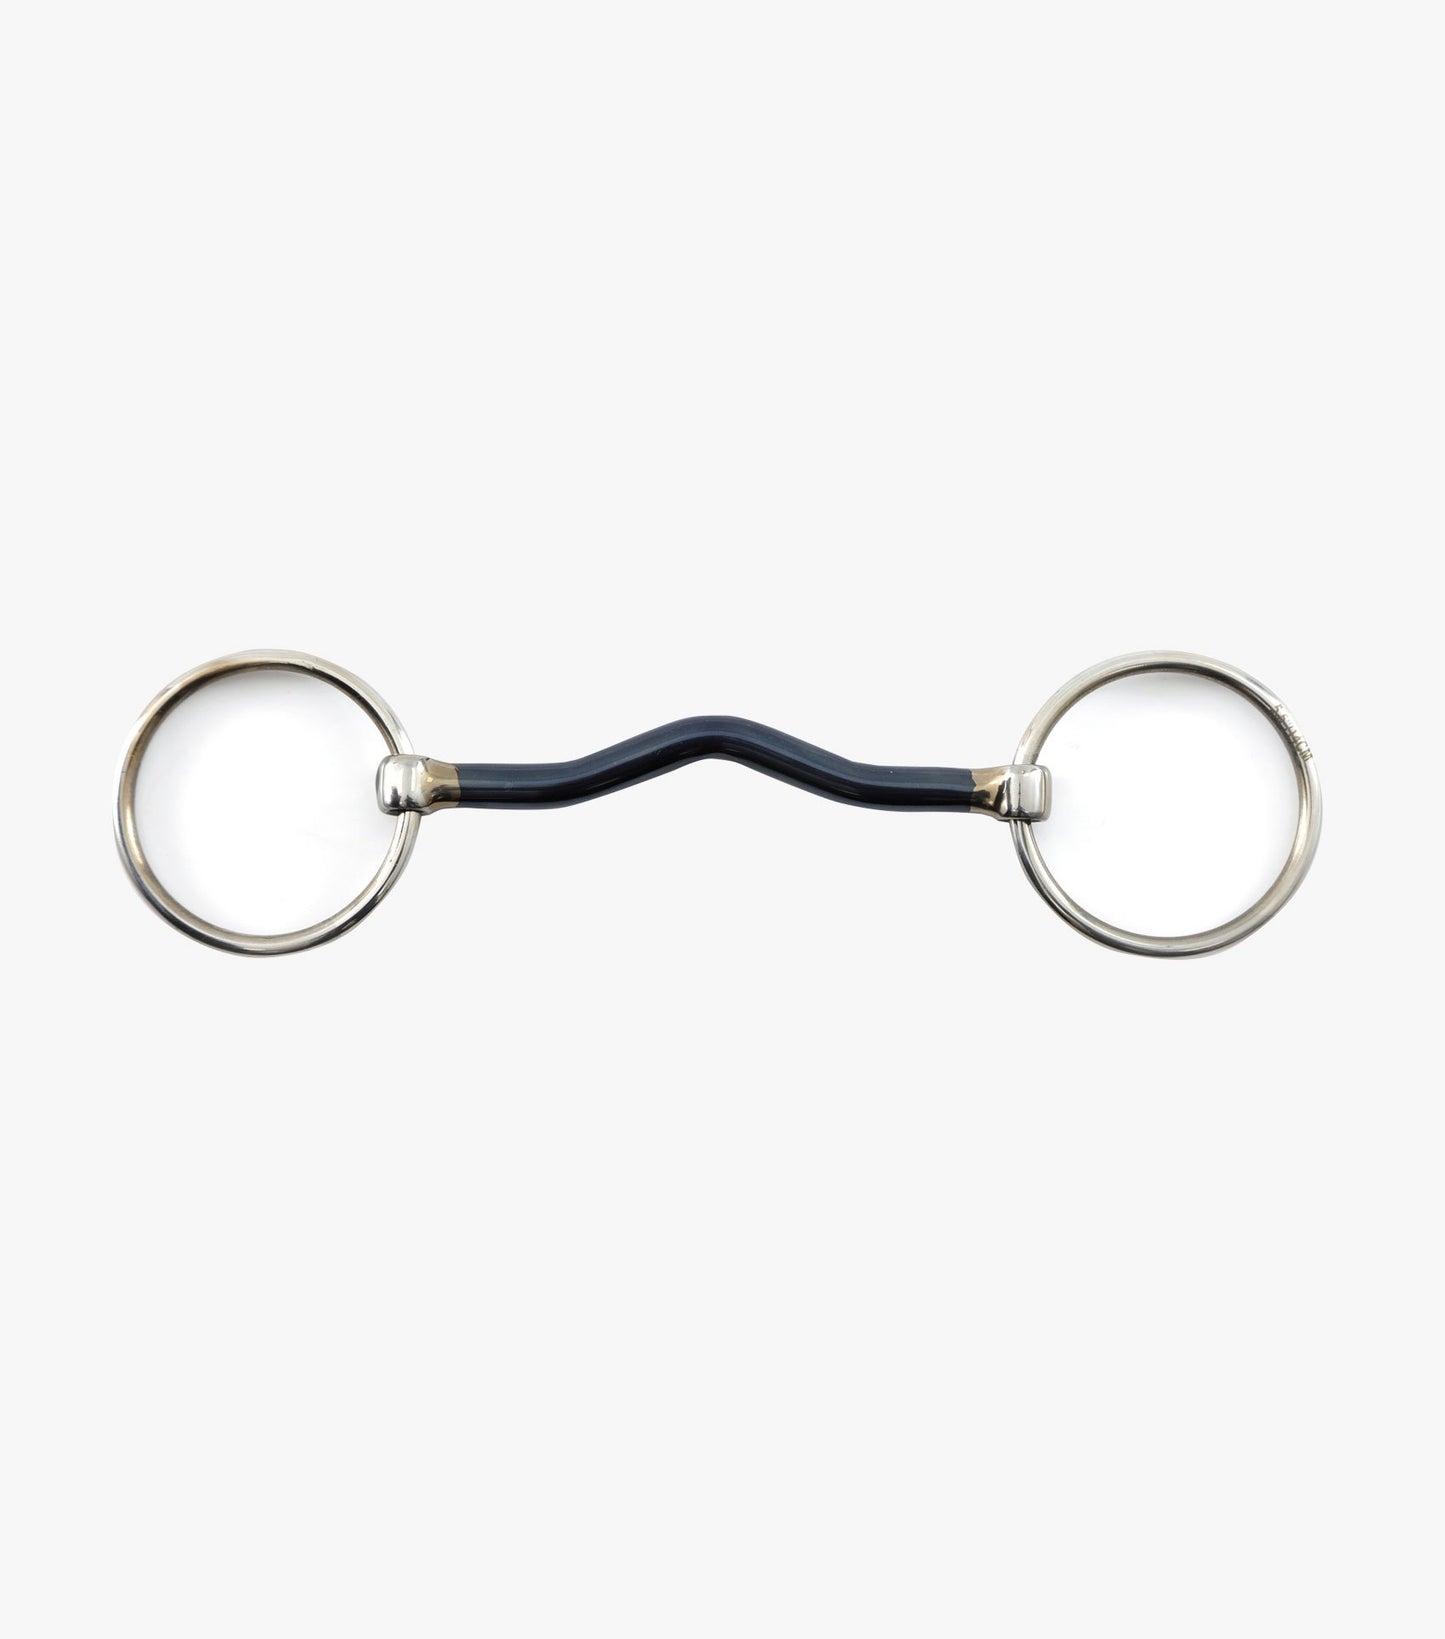 Premier Equine Blue Sweet Iron Loose Ring Mullen Mouth Snaffle